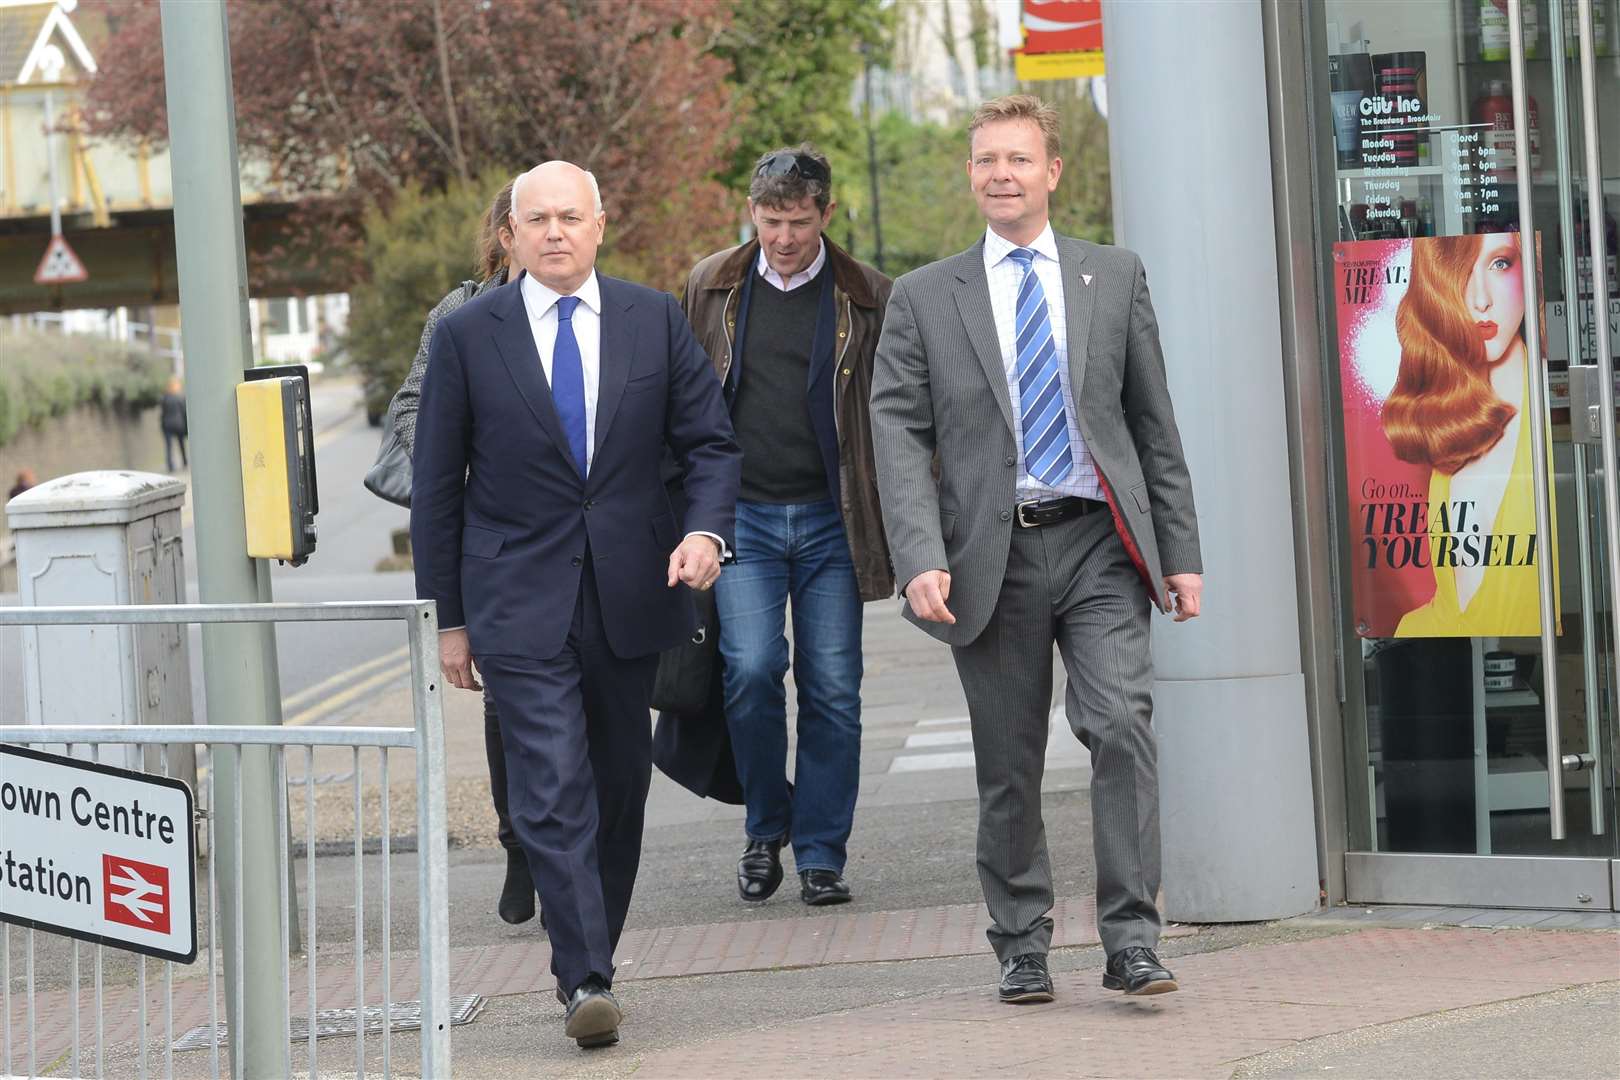 Iain Duncan Smith and then Conservative candidate Craig Mackinlay in 2015